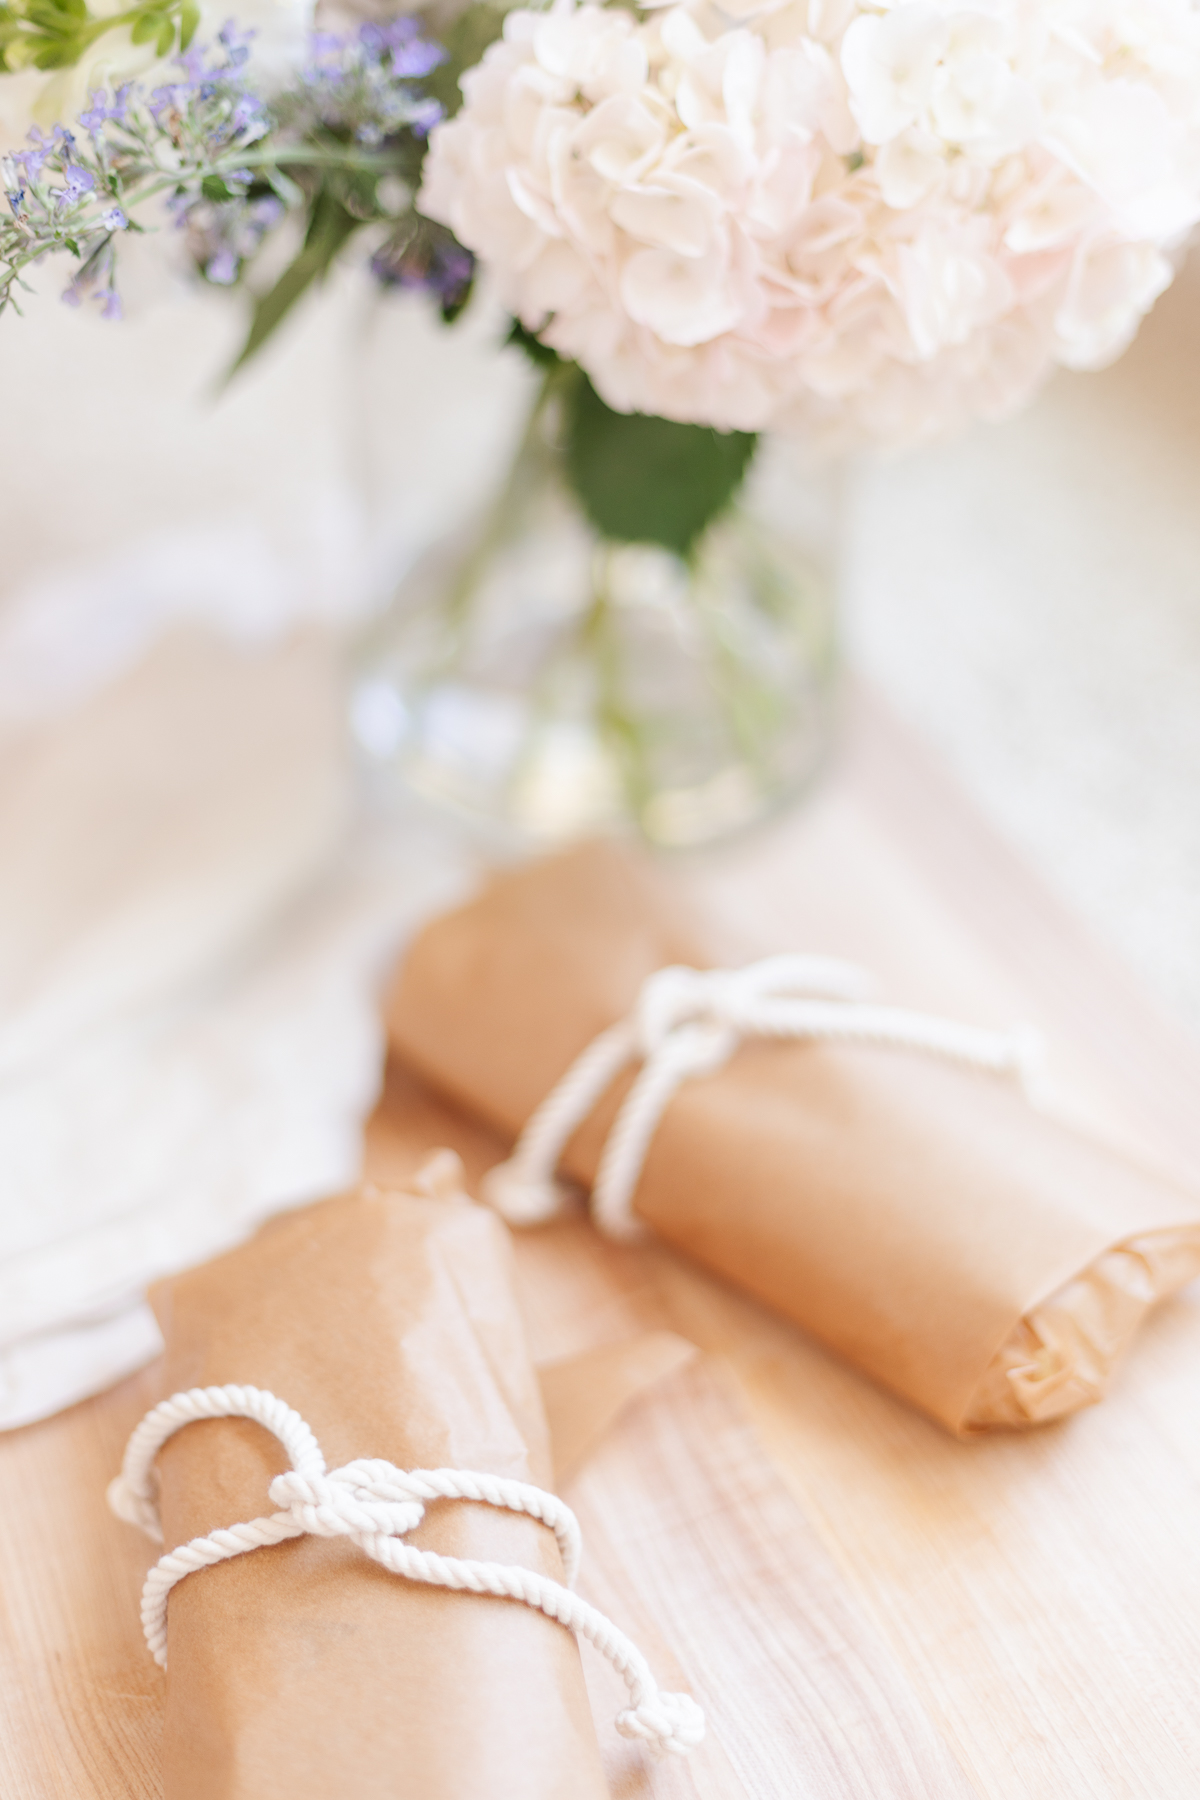 Picnic sandwiches on a wooden cutting board, wrapped in brown paper with a white string.